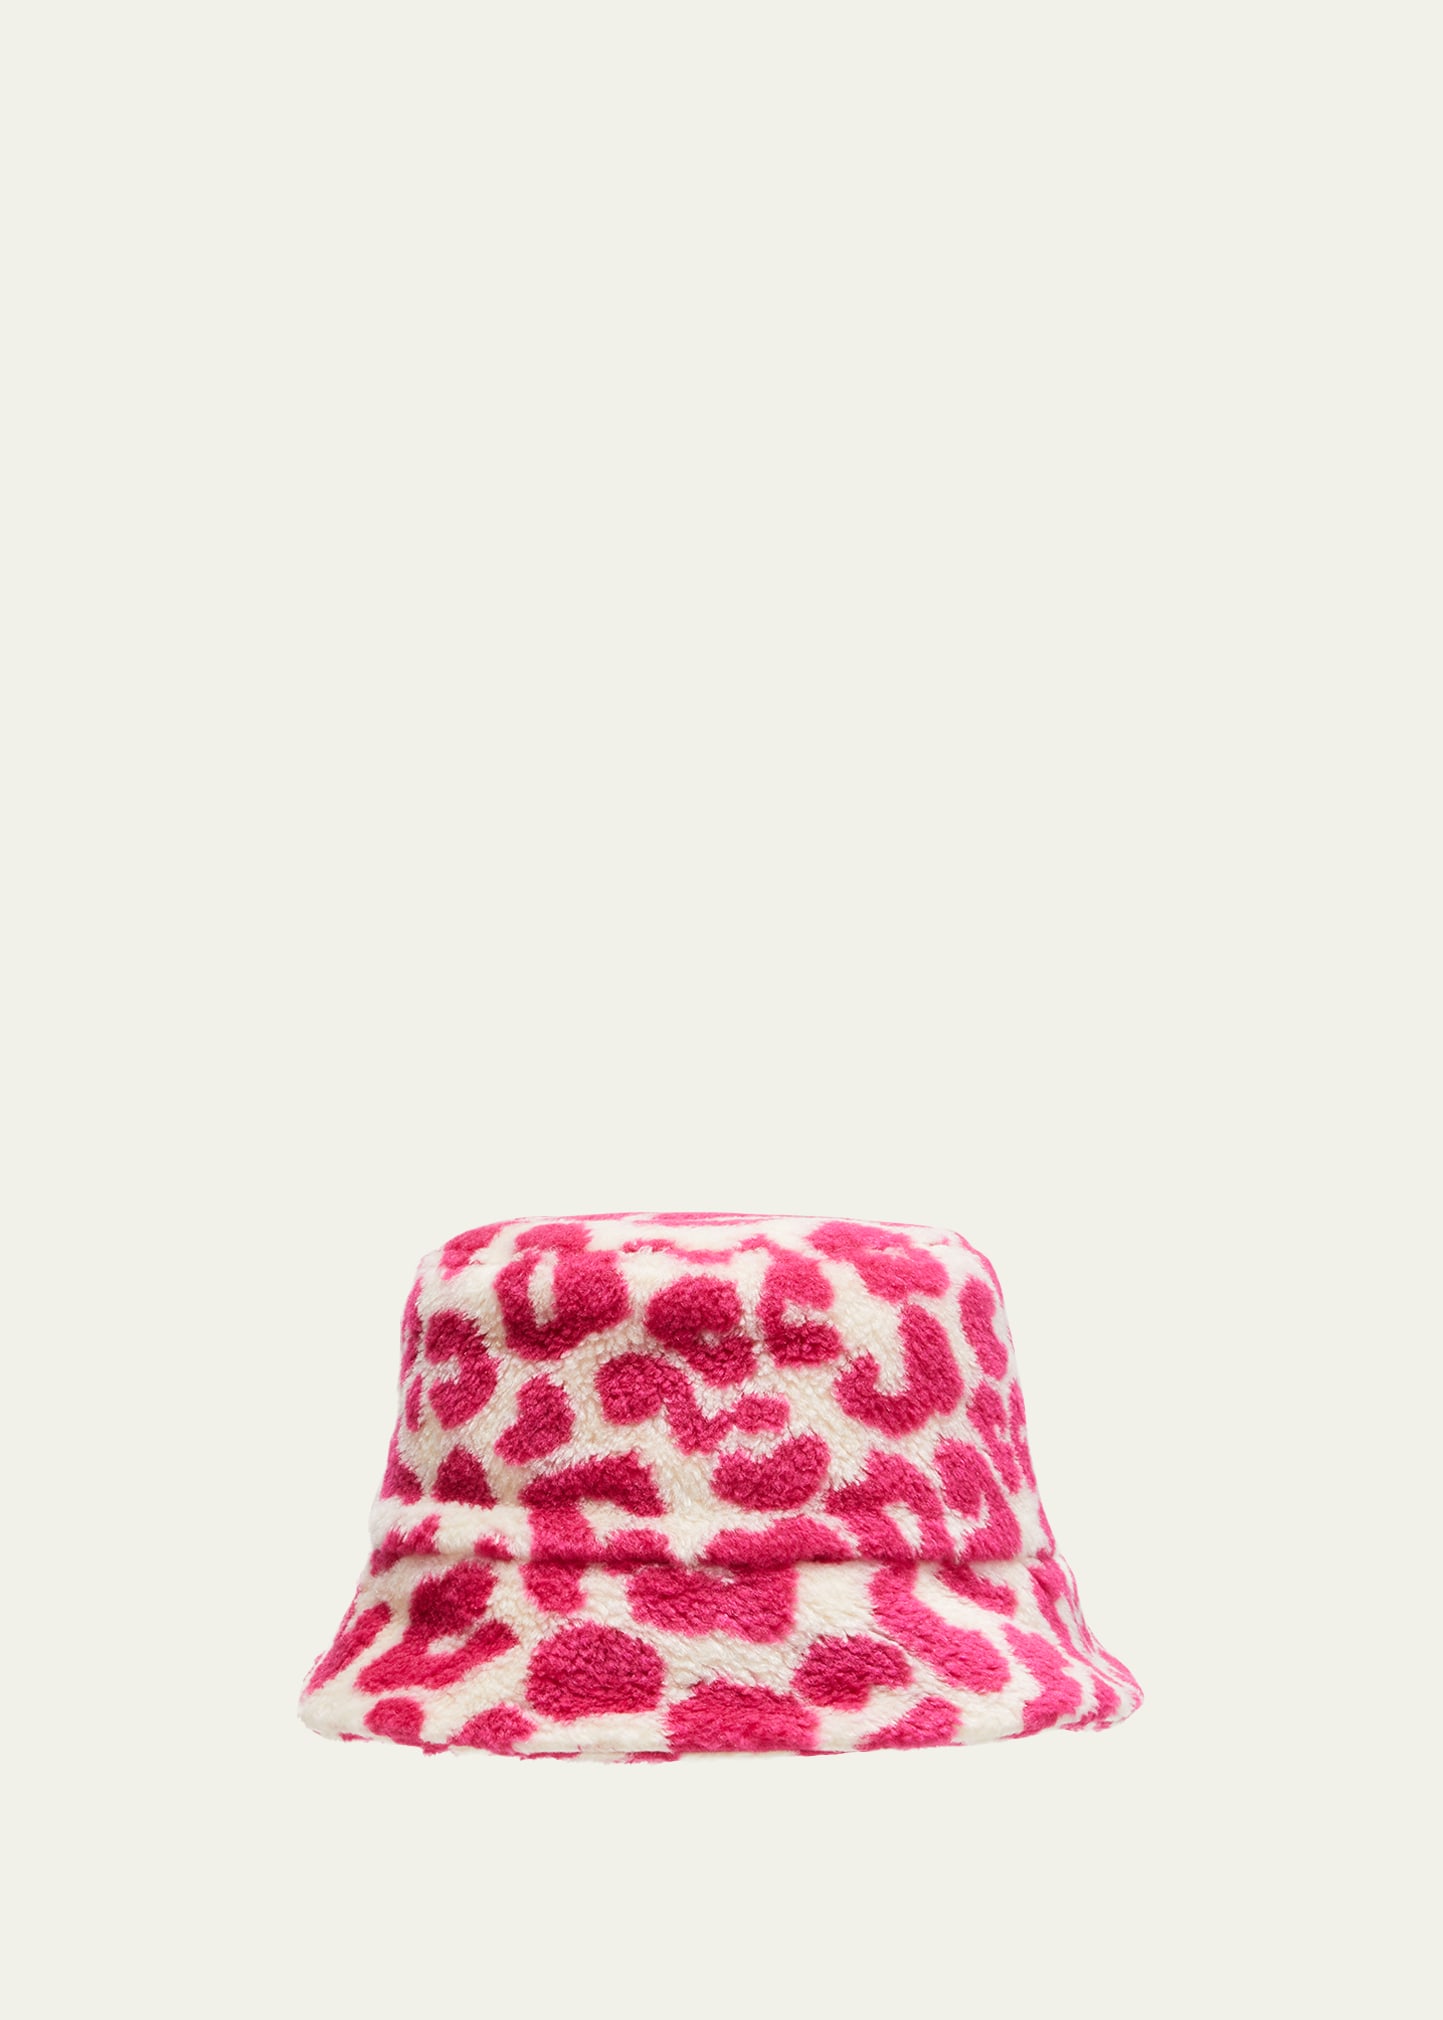 Moncler Genius X Jw Anderson Cheetah-print Bucket Hat With Logo Detail In Light Pink